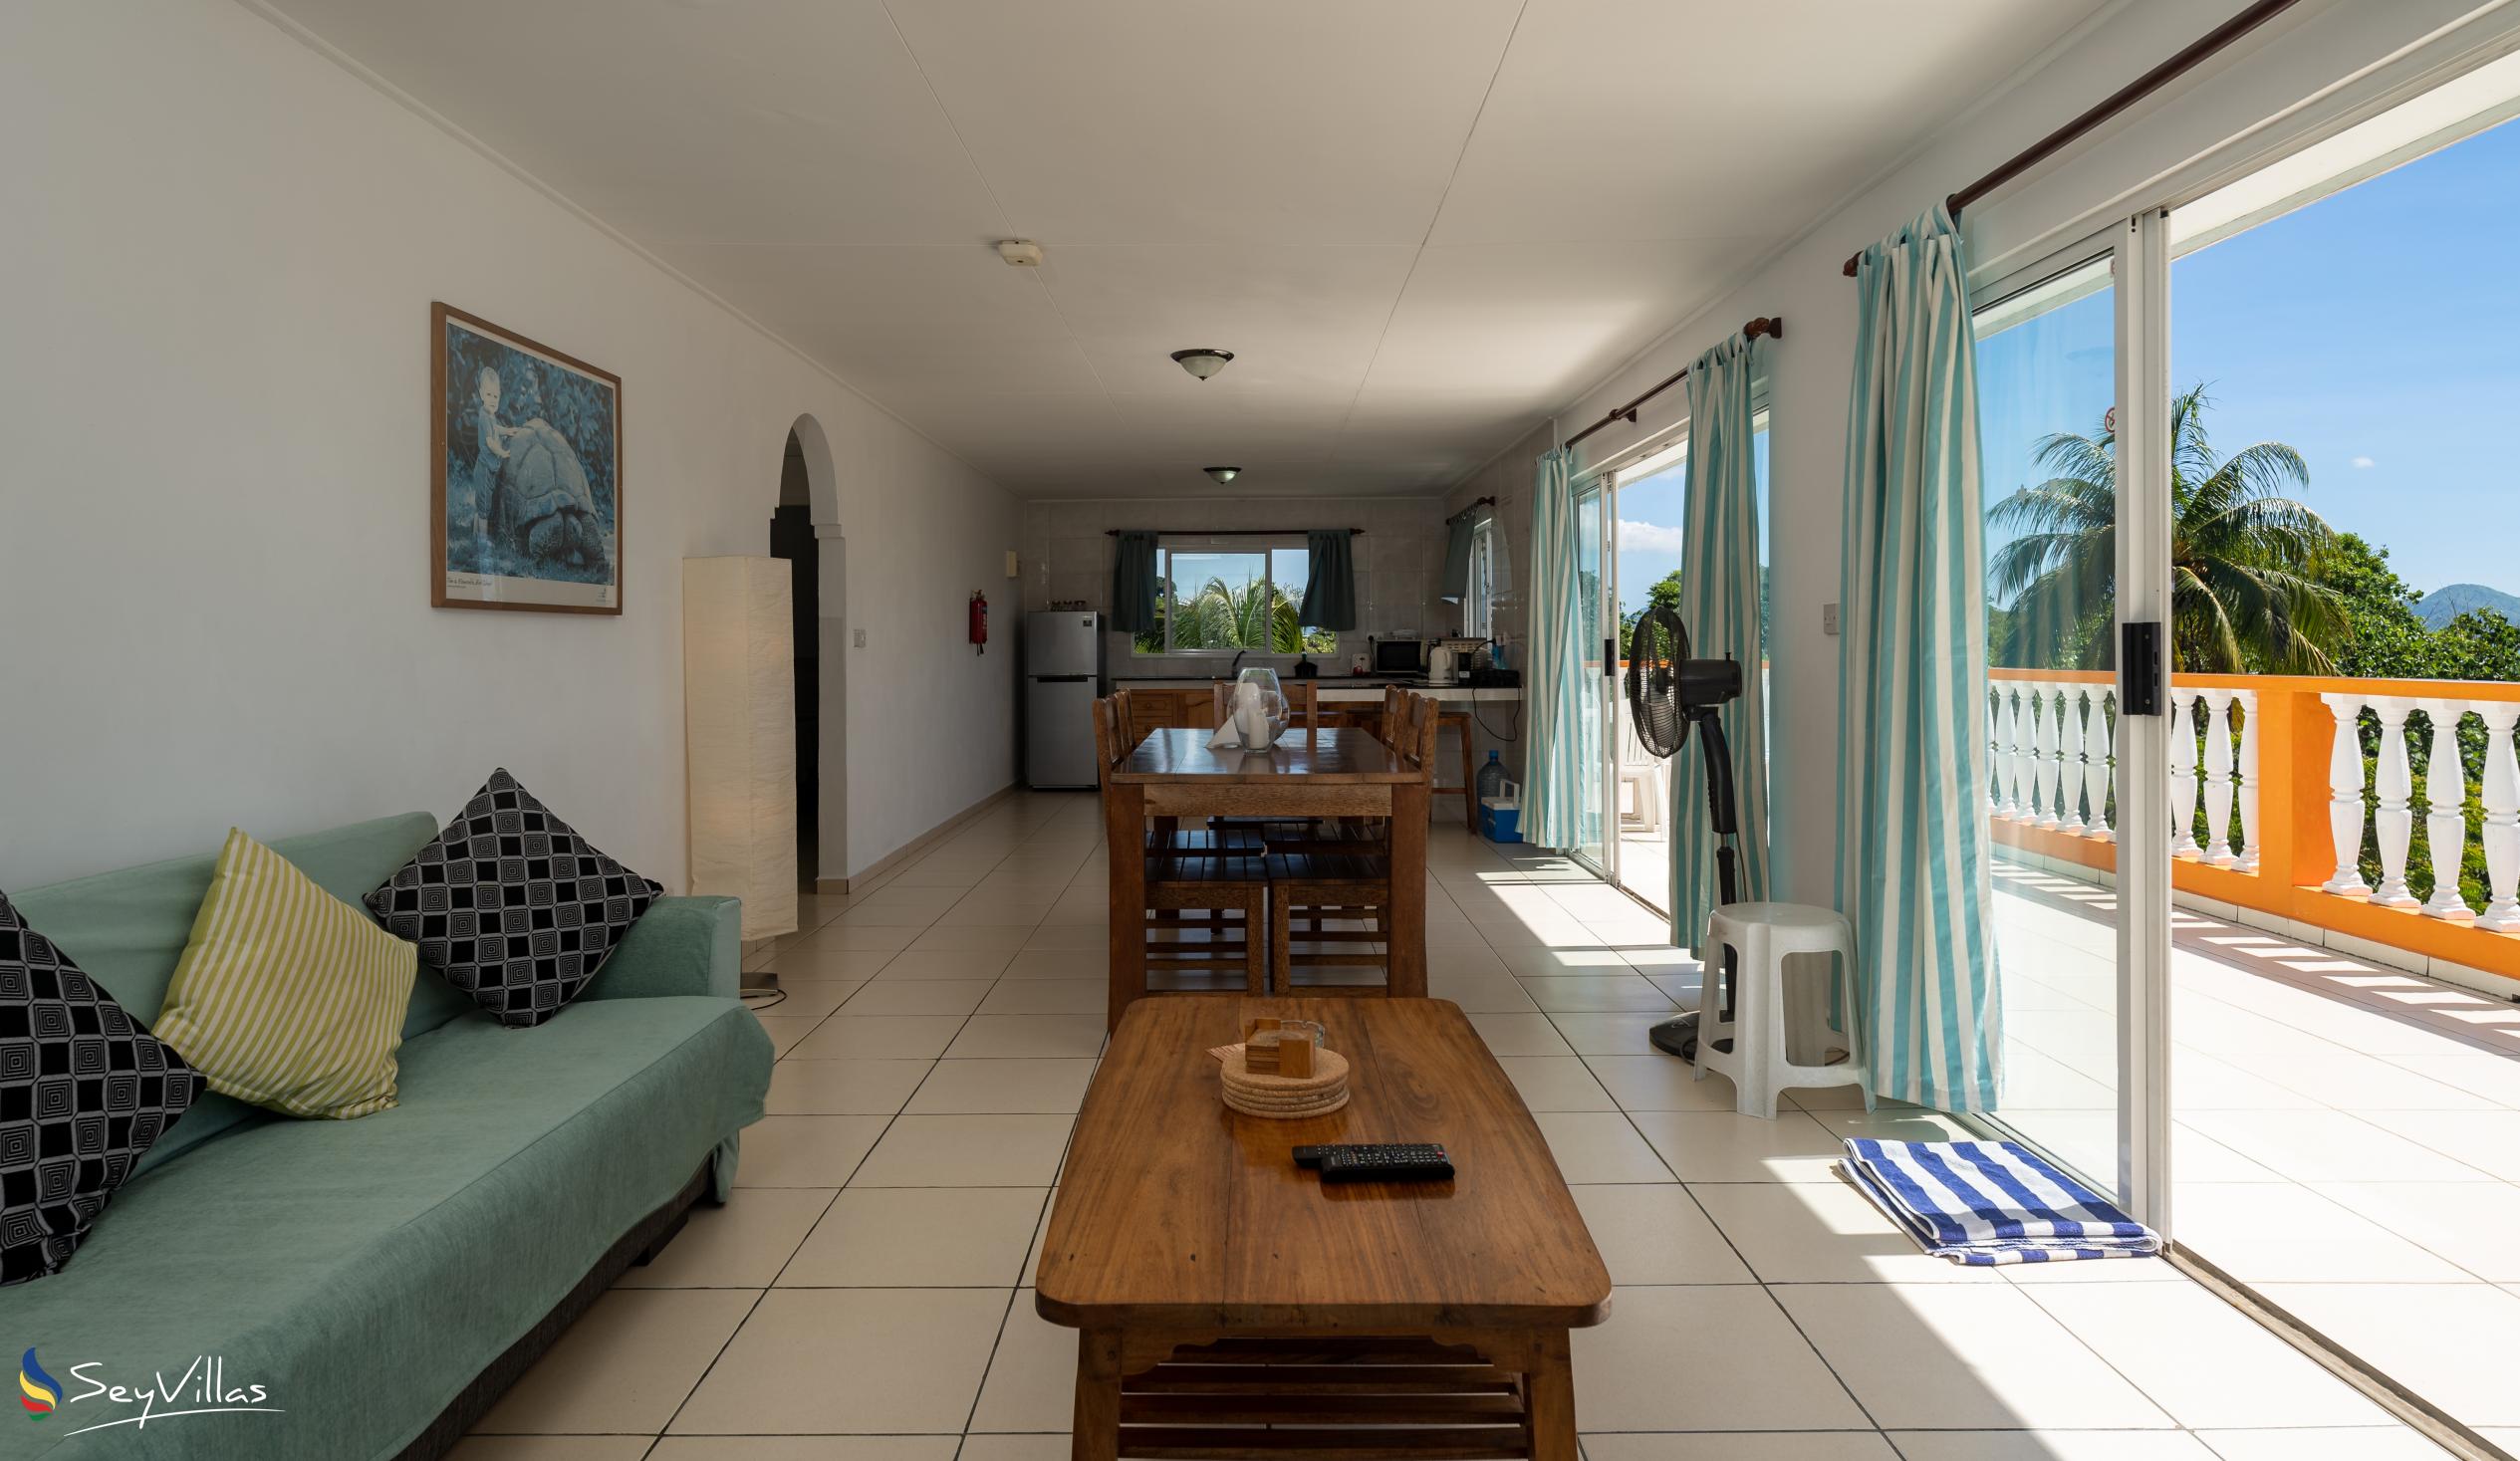 Foto 43: Chez Payet Self Catering - Appartement 2 Chambres Coco - Mahé (Seychelles)